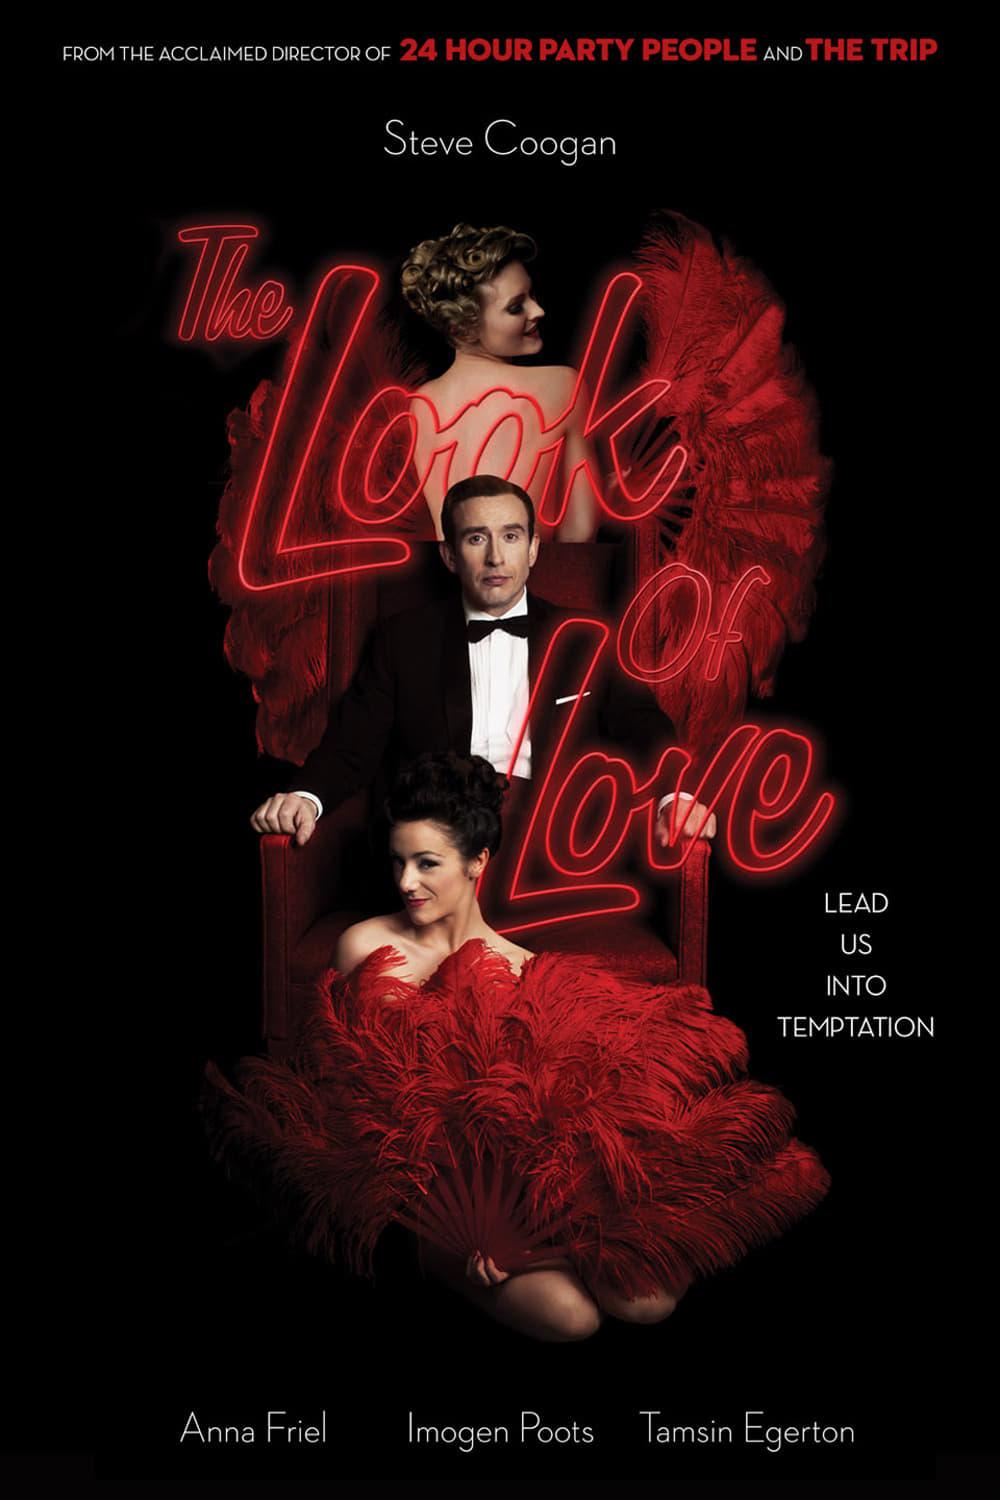 The Look of Love poster